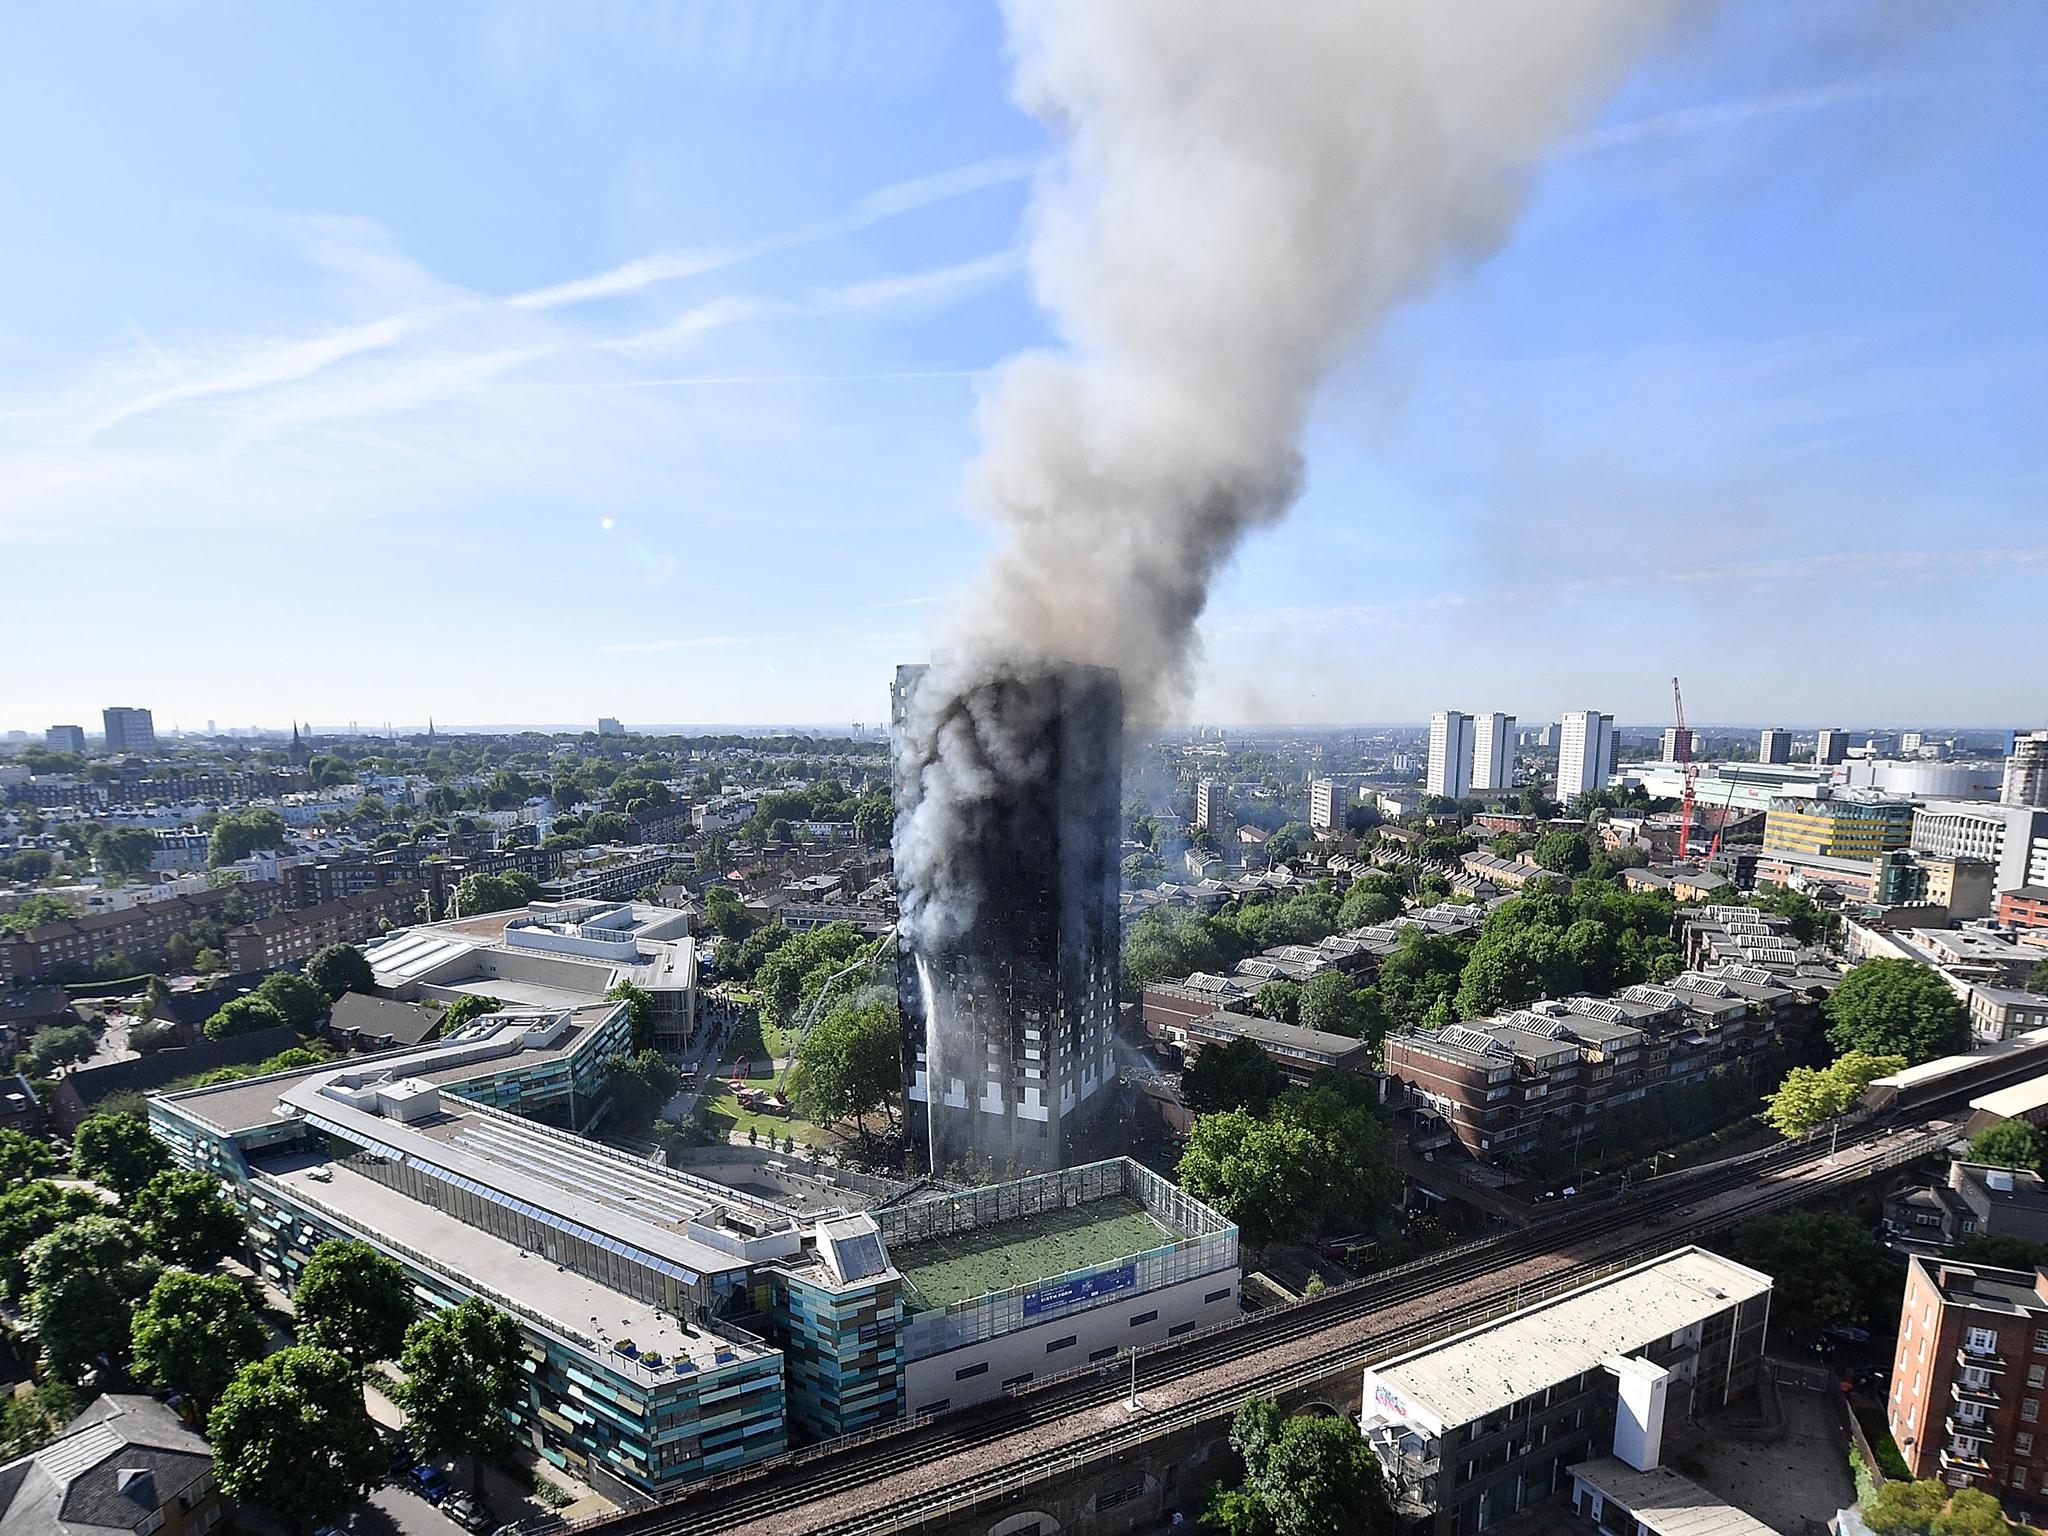 If developers had taken fire risks seriously this tragedy would not have happened